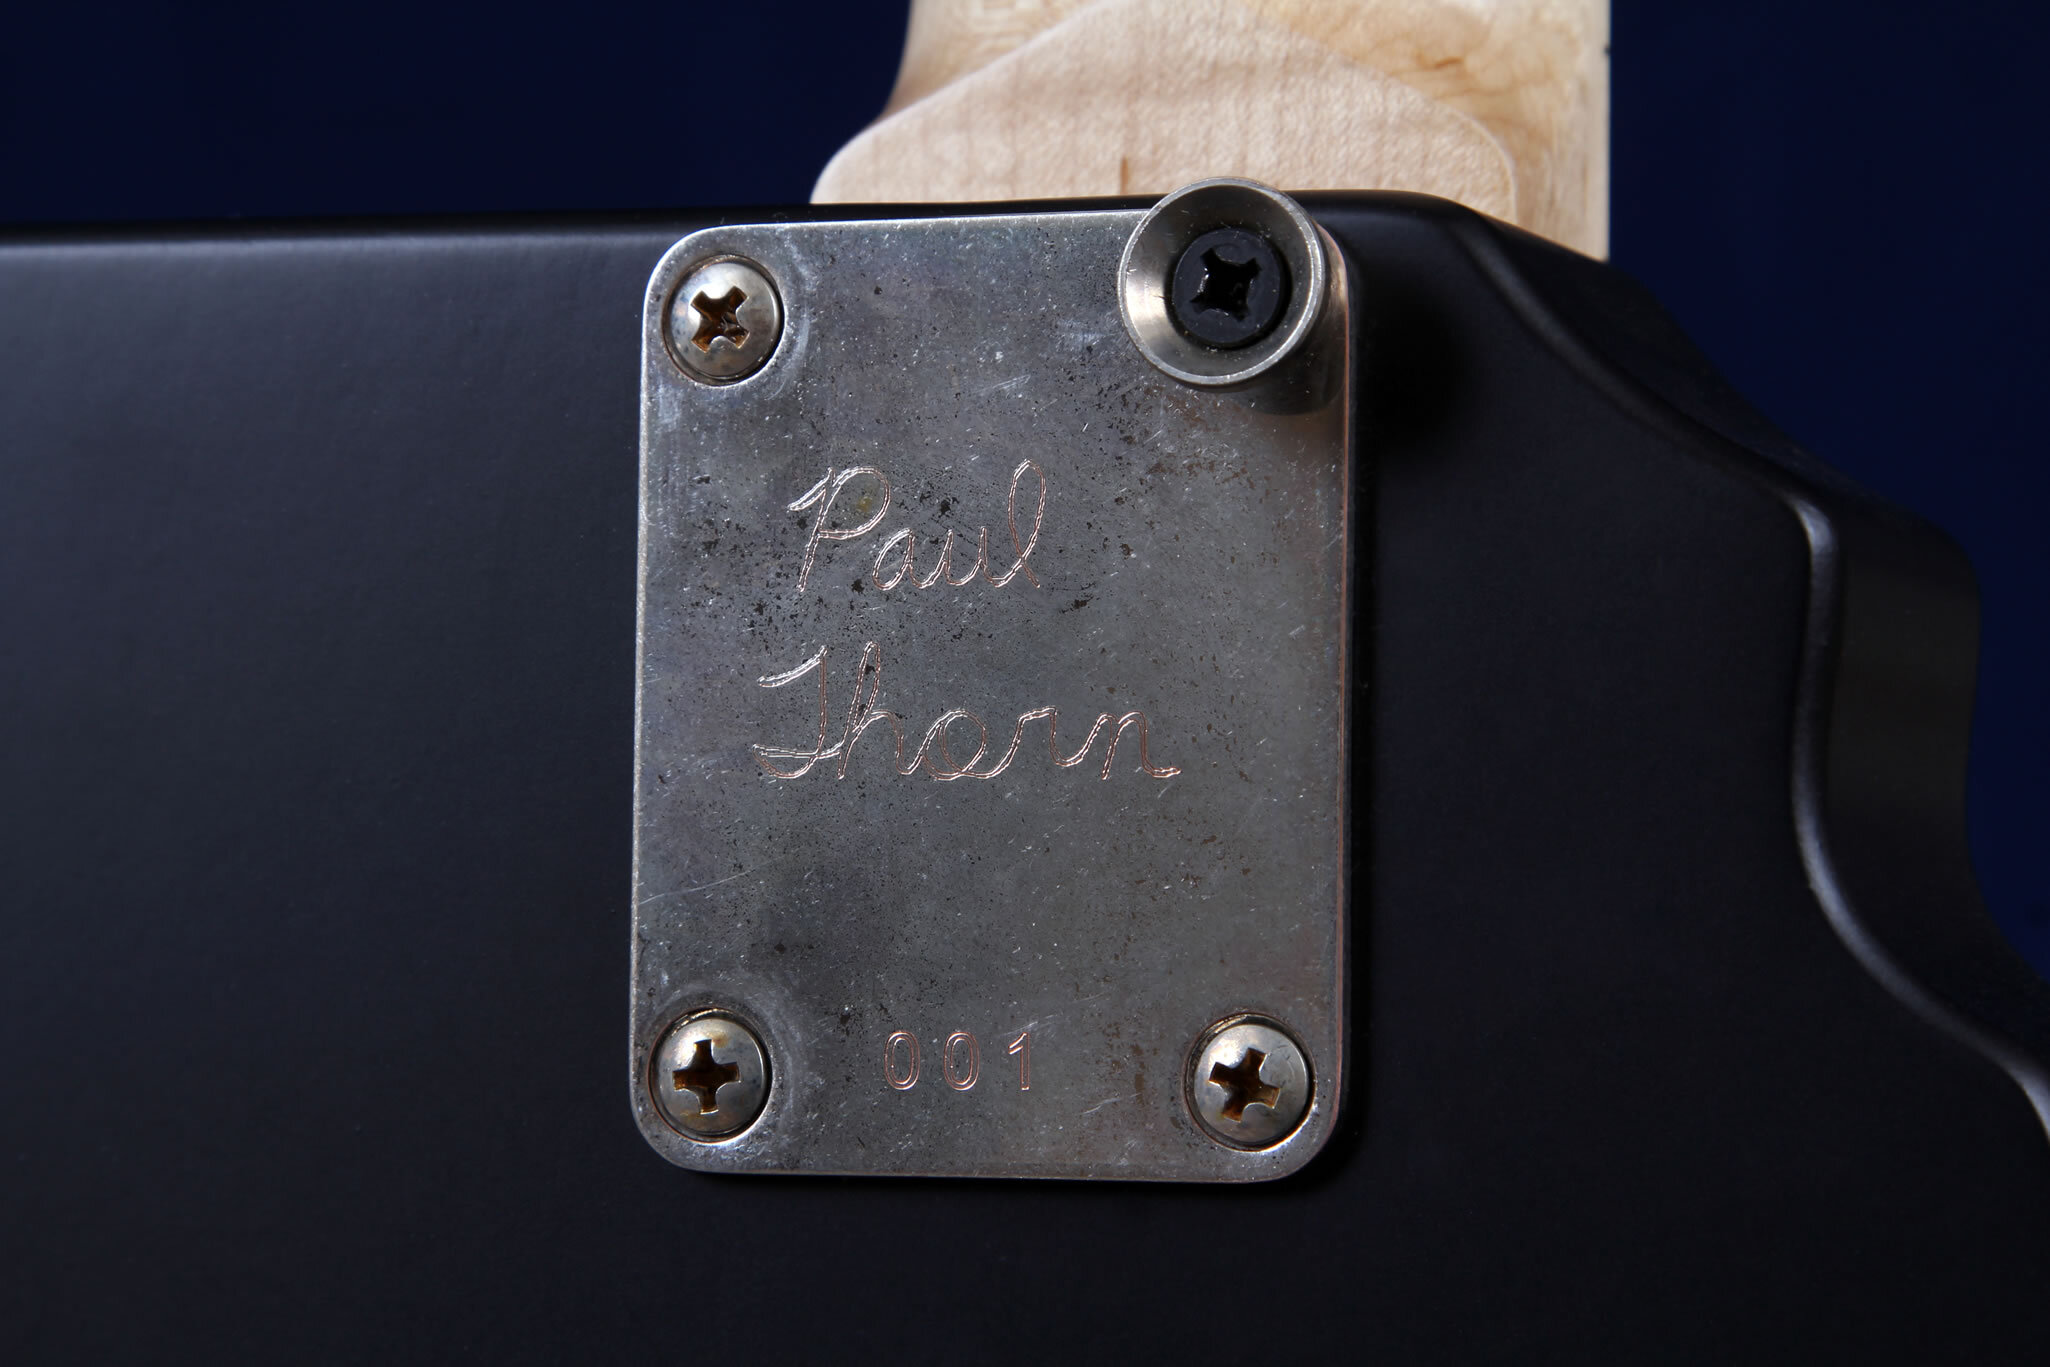 Paul Thorn autograph engraved on relic'd neck plate